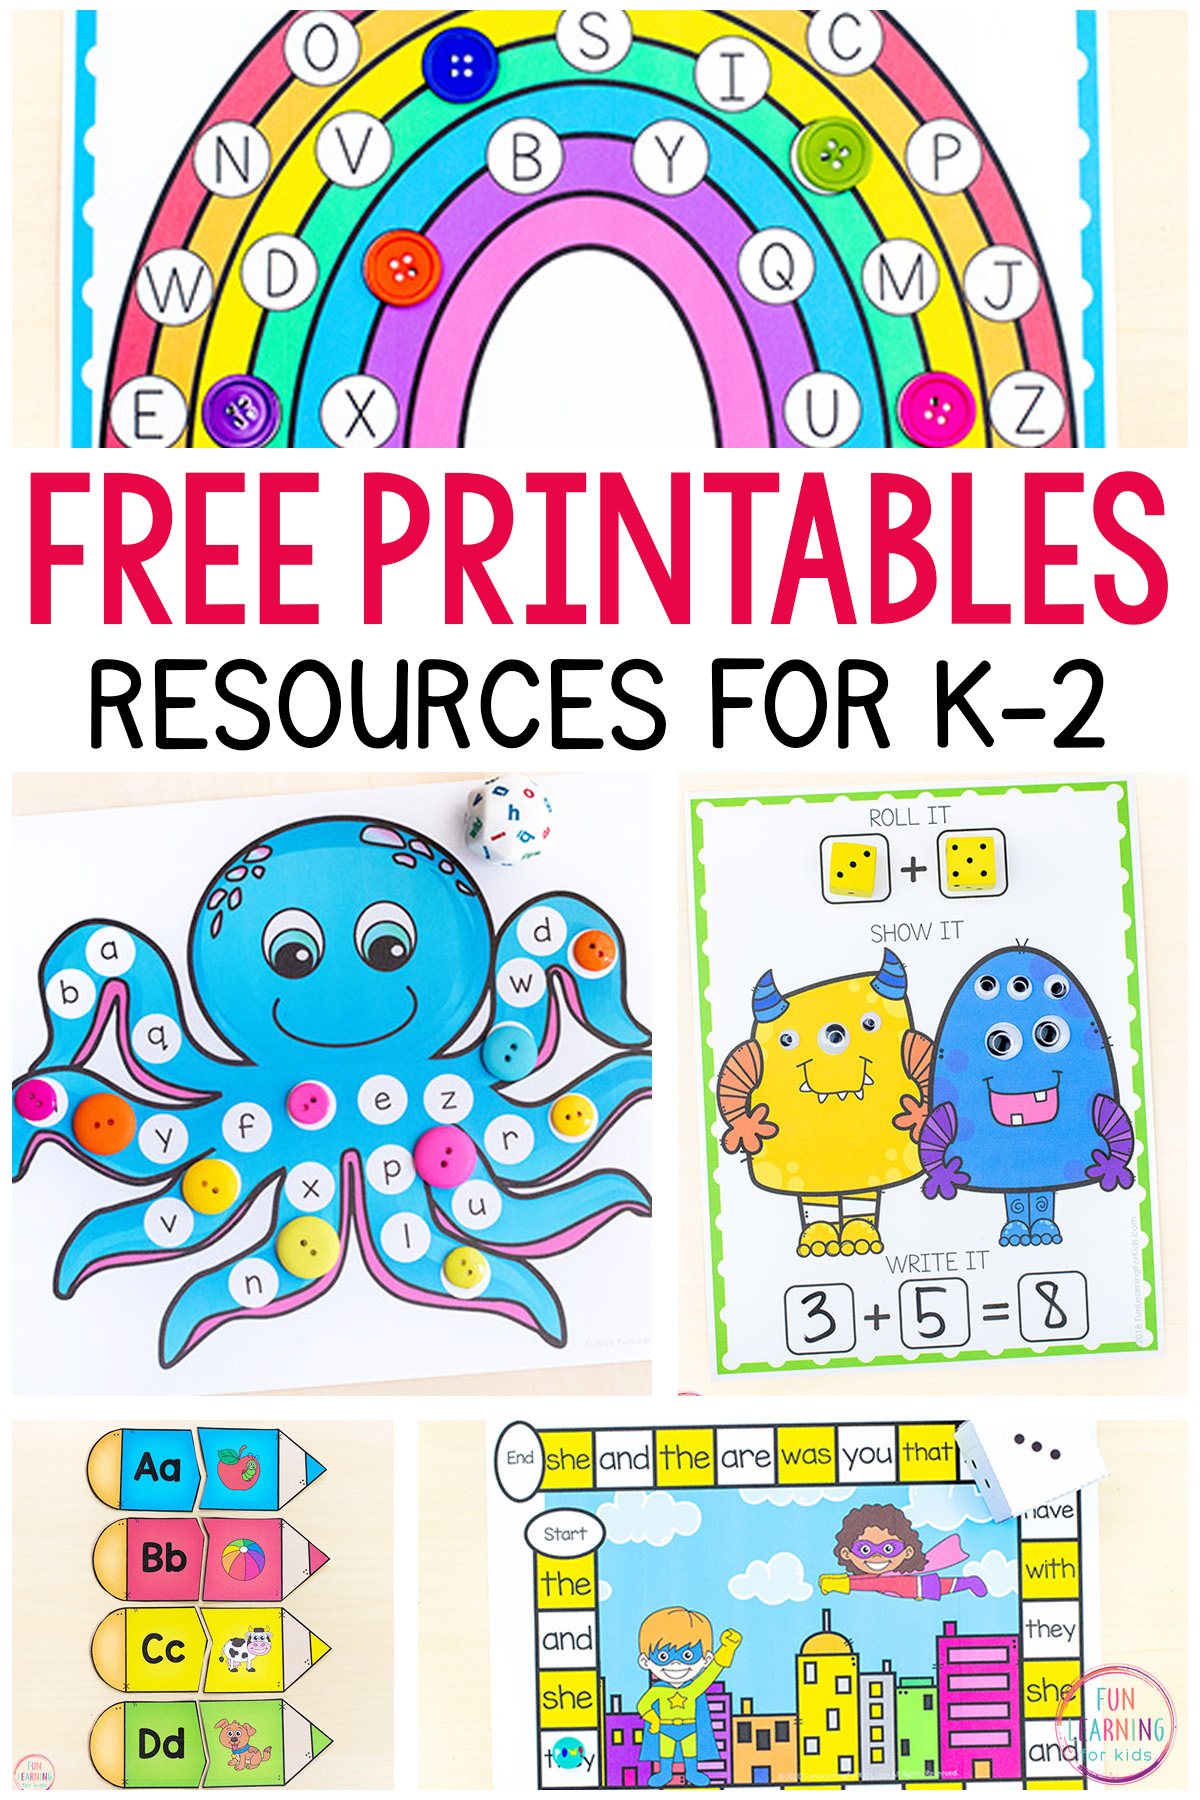 Free-Printables-and-Activities-for-Kids-7